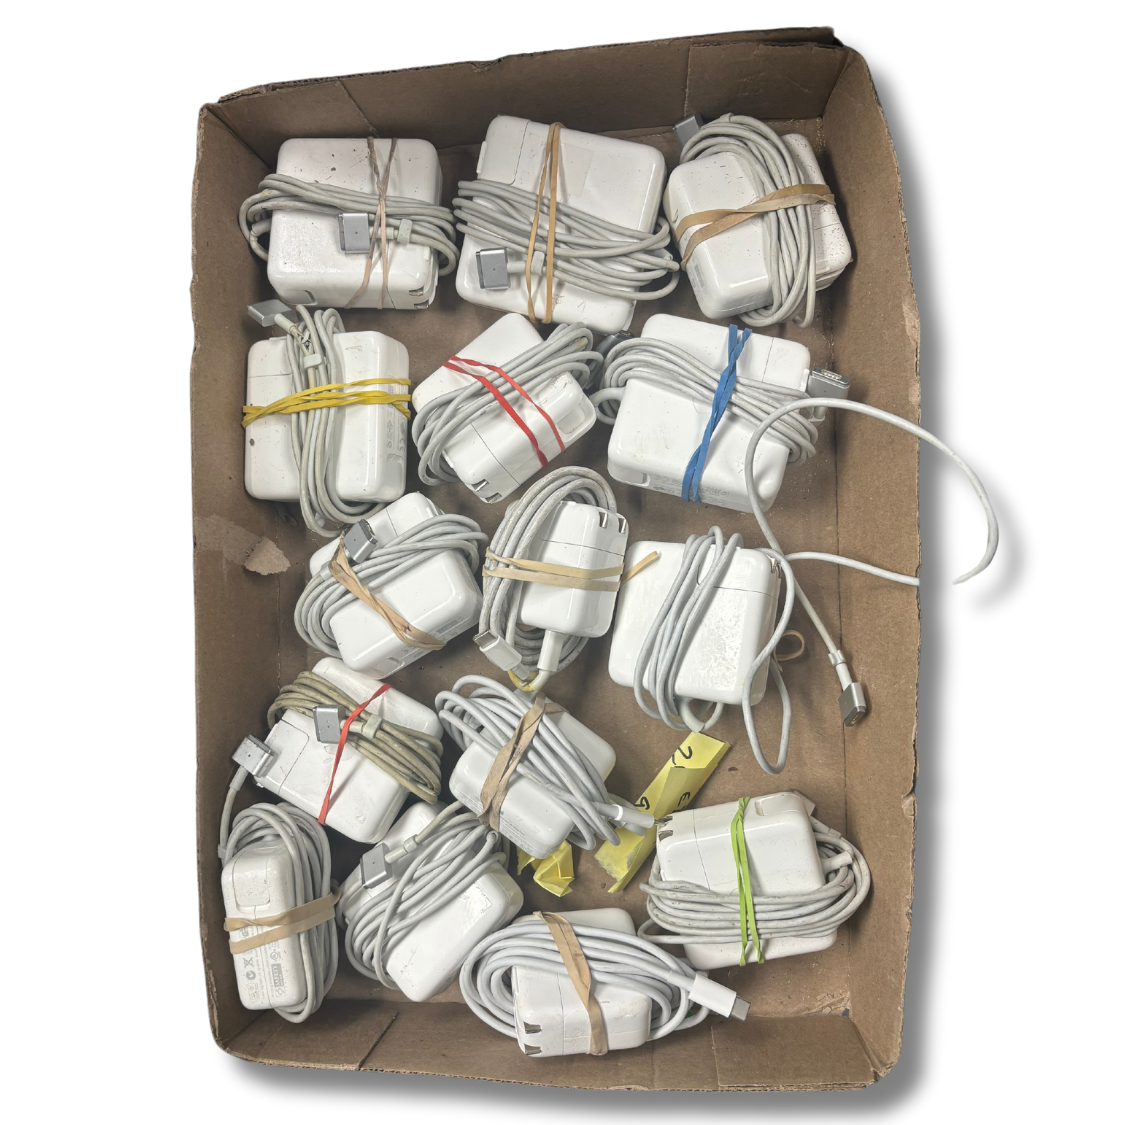 12 Apple Chargers (Bulk Order Deal)